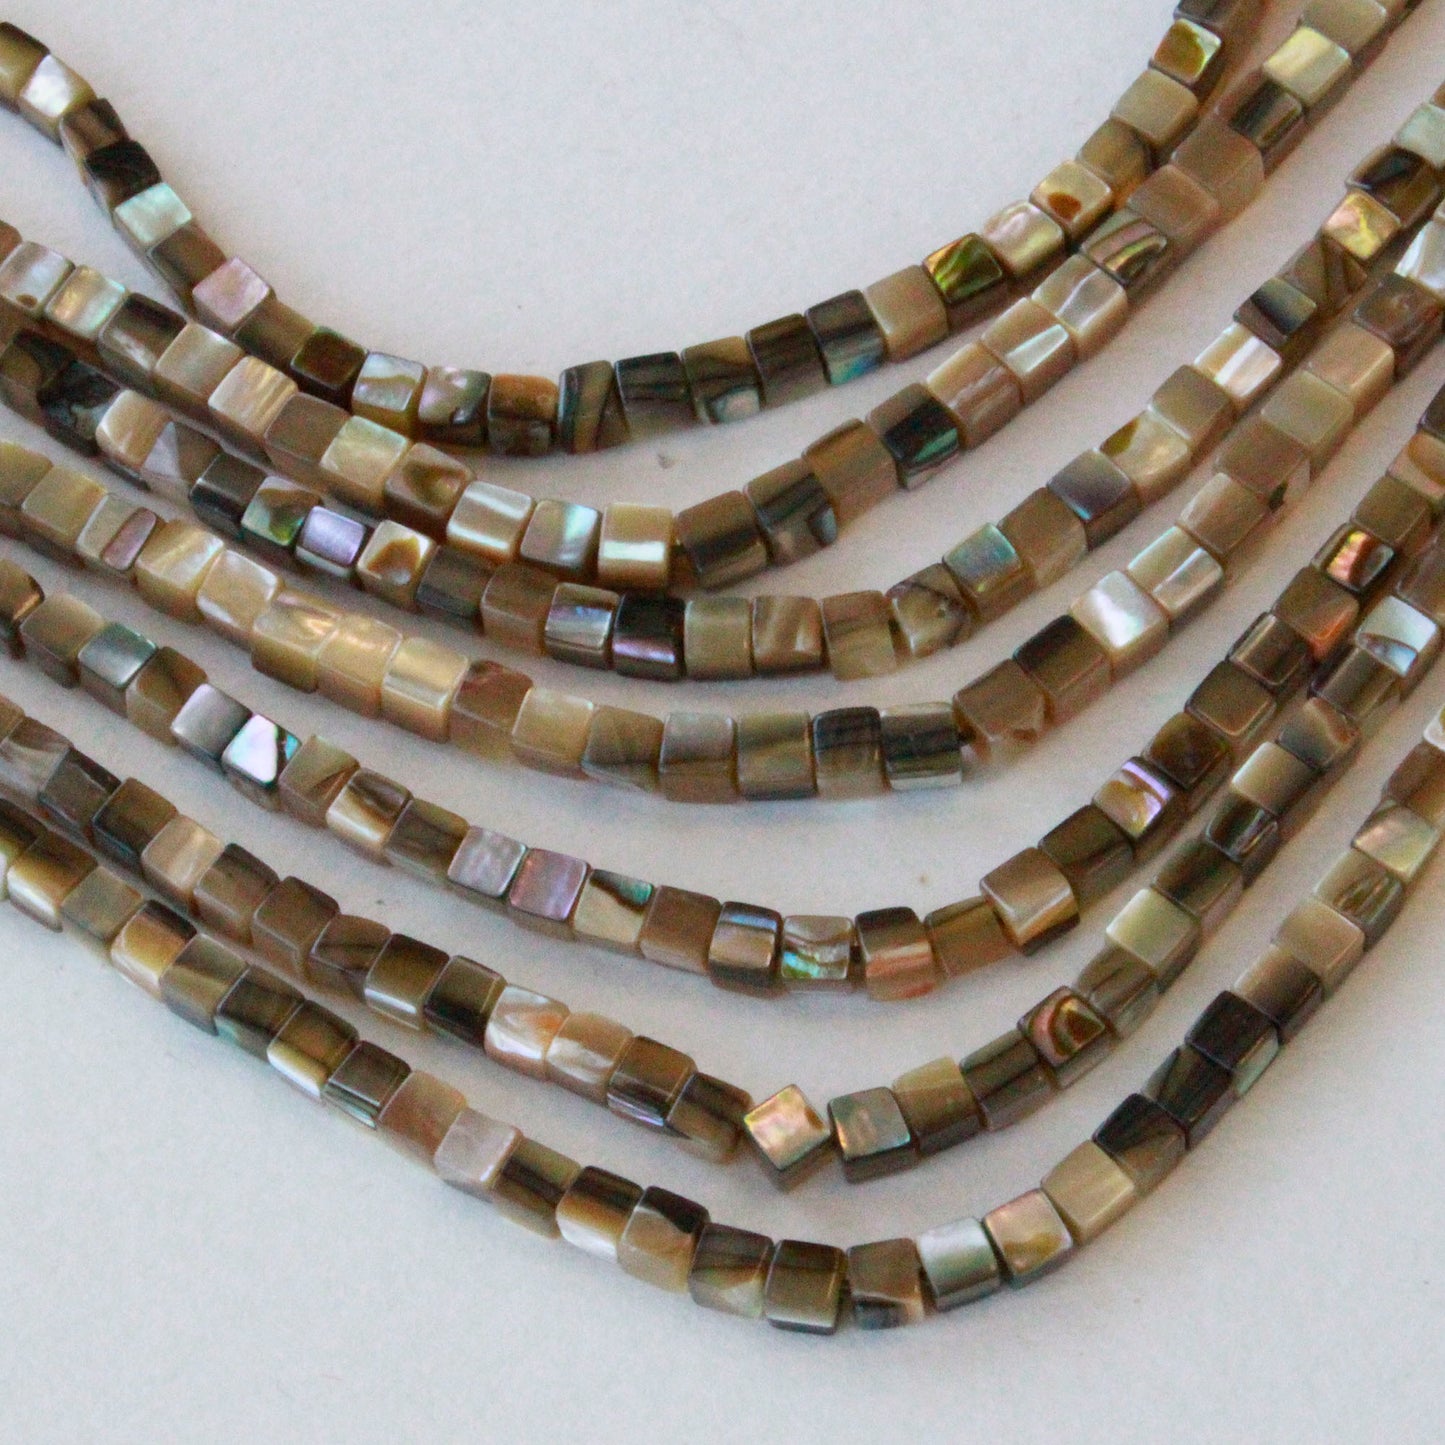 3mm Abalone Cube Beads - 16 Inch Strand